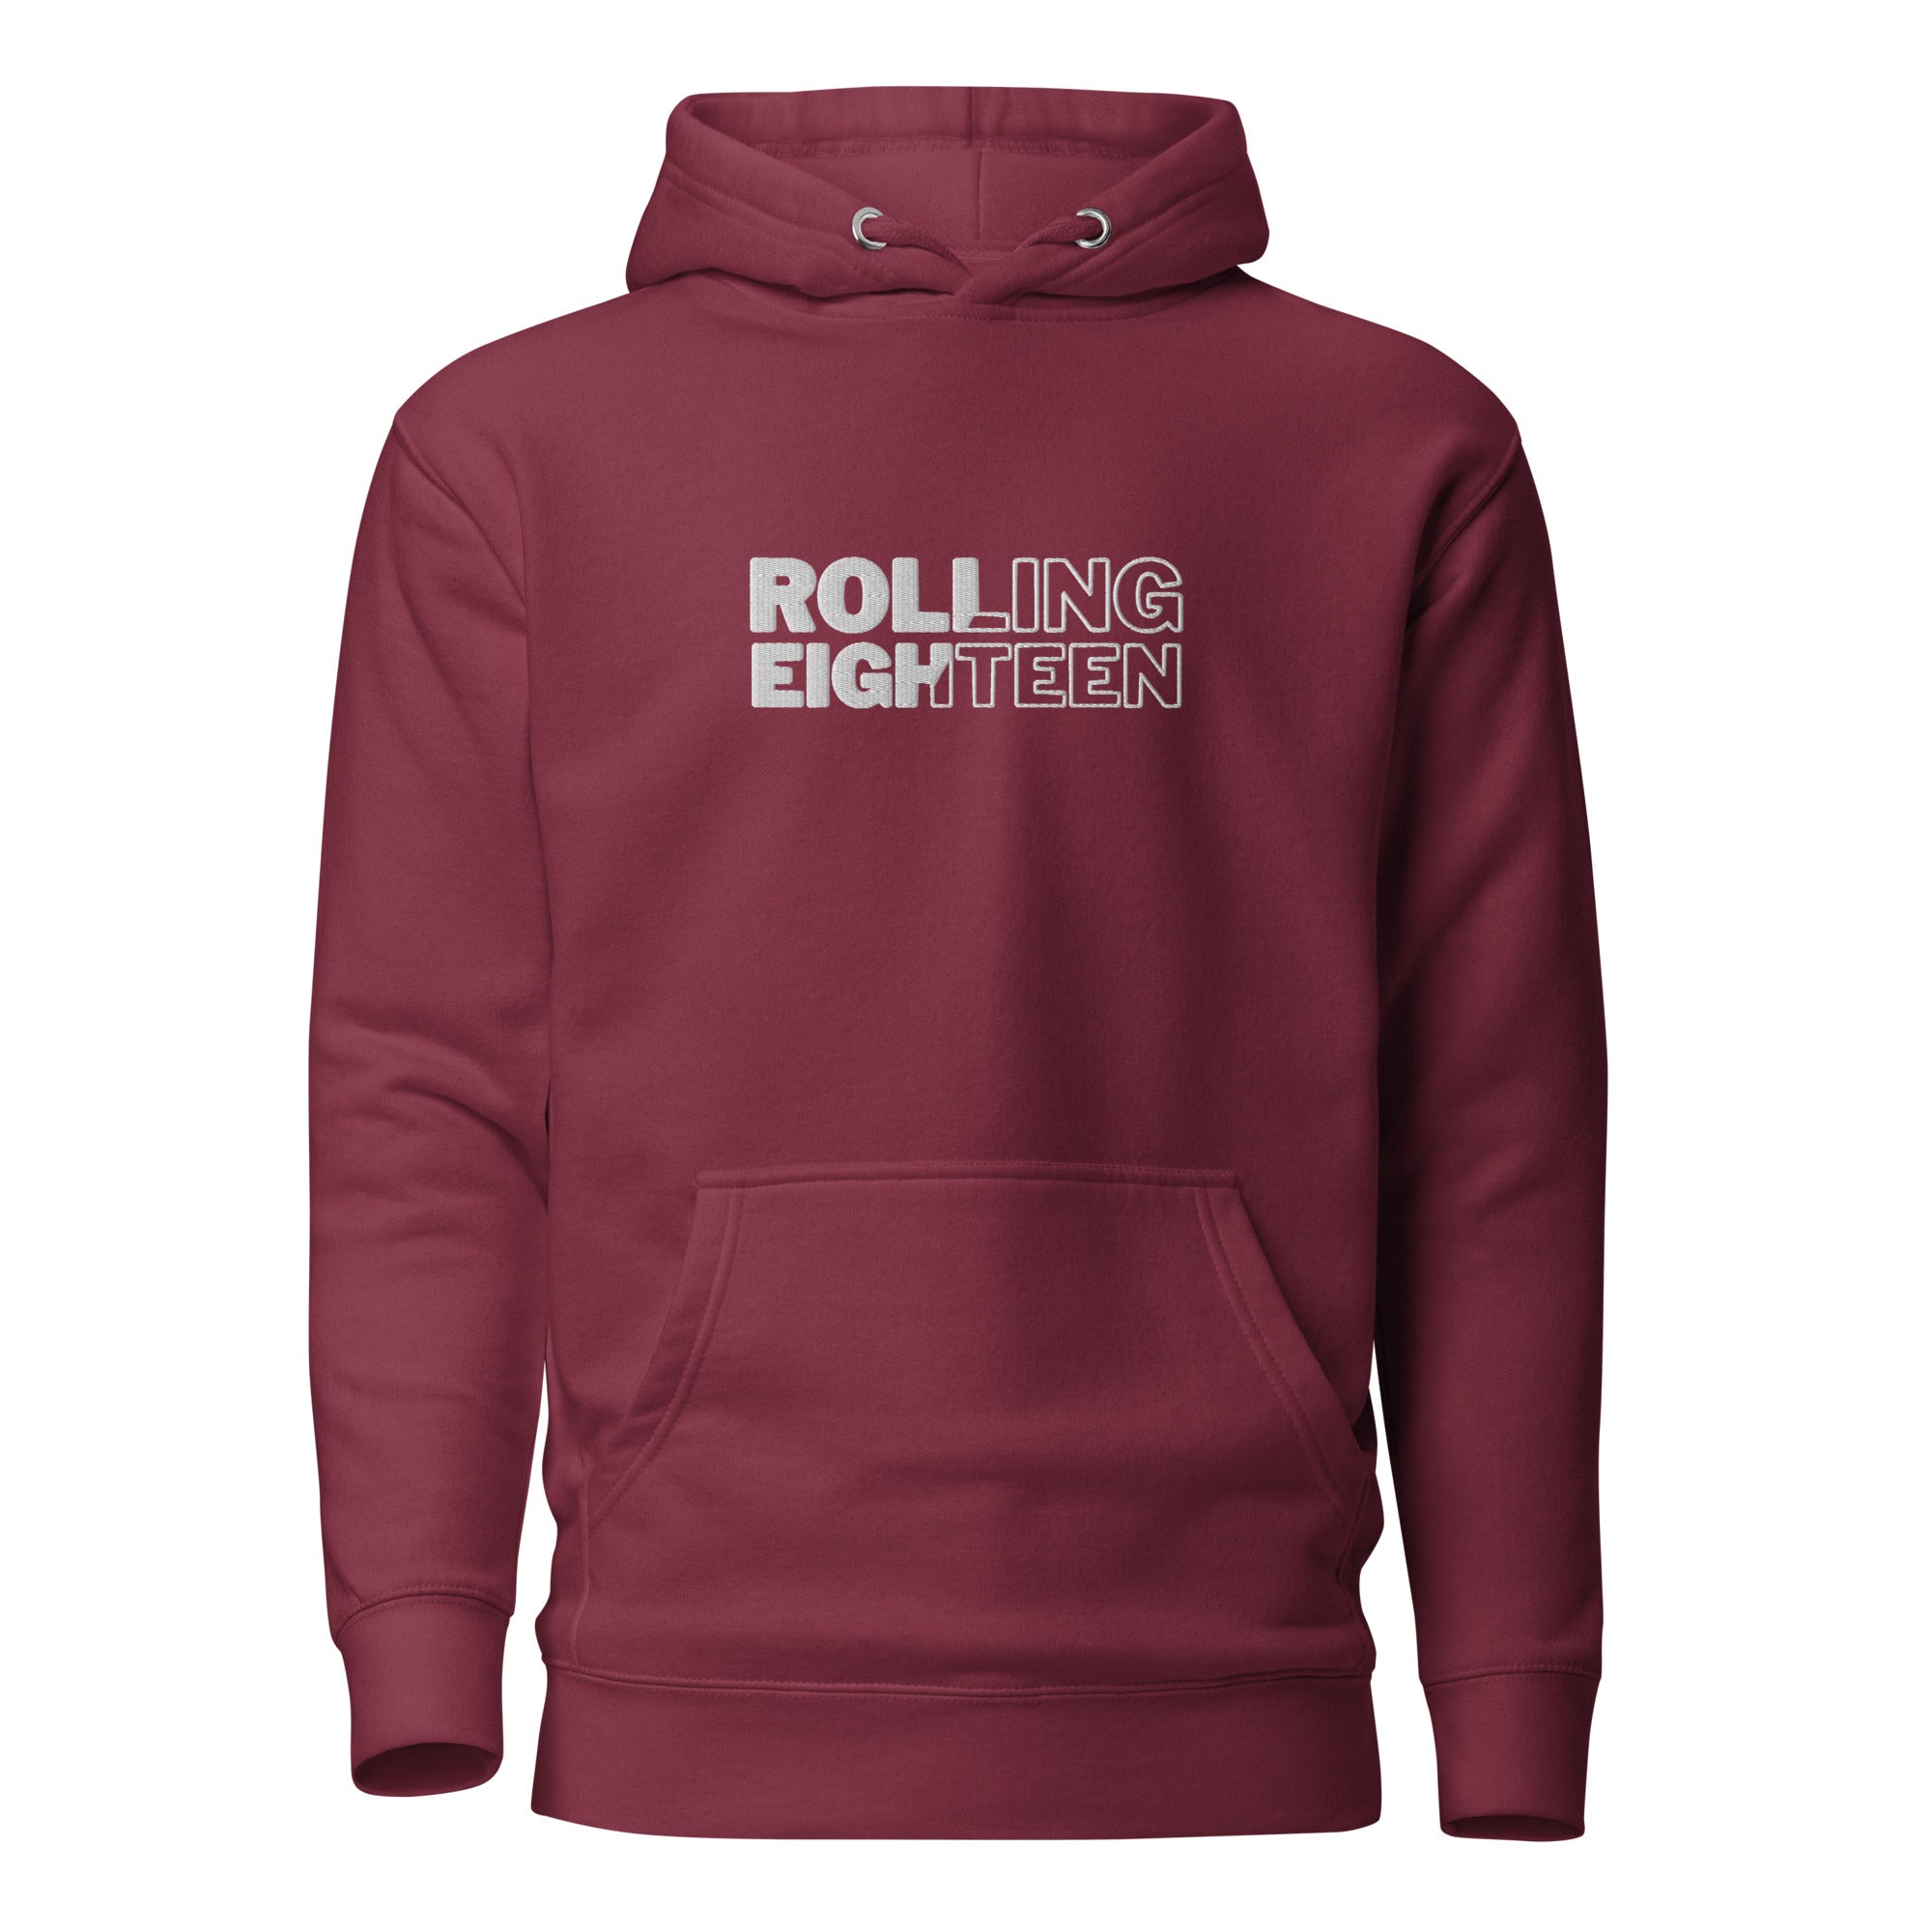 ROLLING18 Embroidered Premium Hoodie